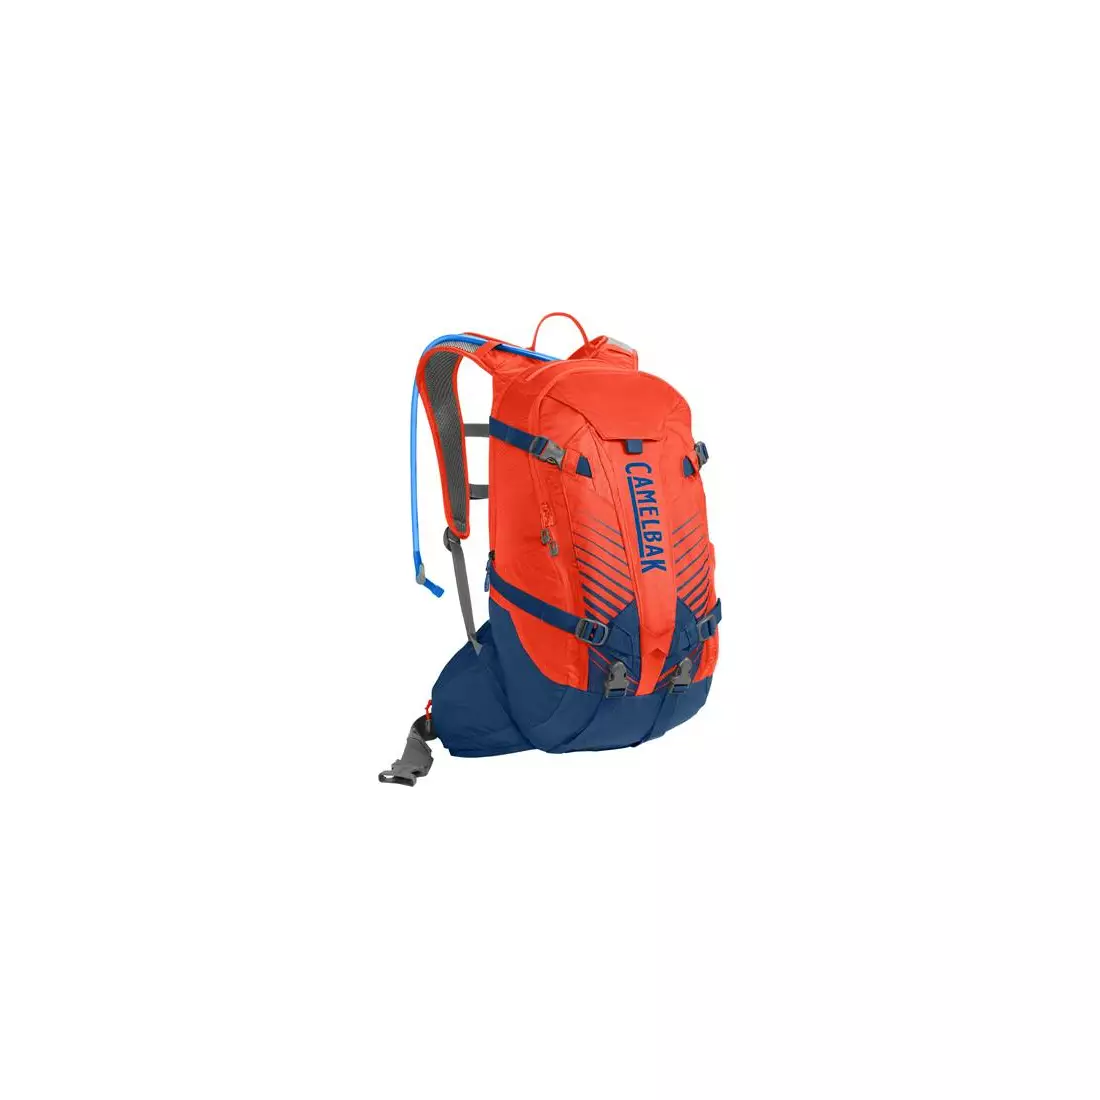 Camelbak SS18 bicycle backpack KUDU 18 DRY Cherry Tomato/Pitch Blue 1357601900